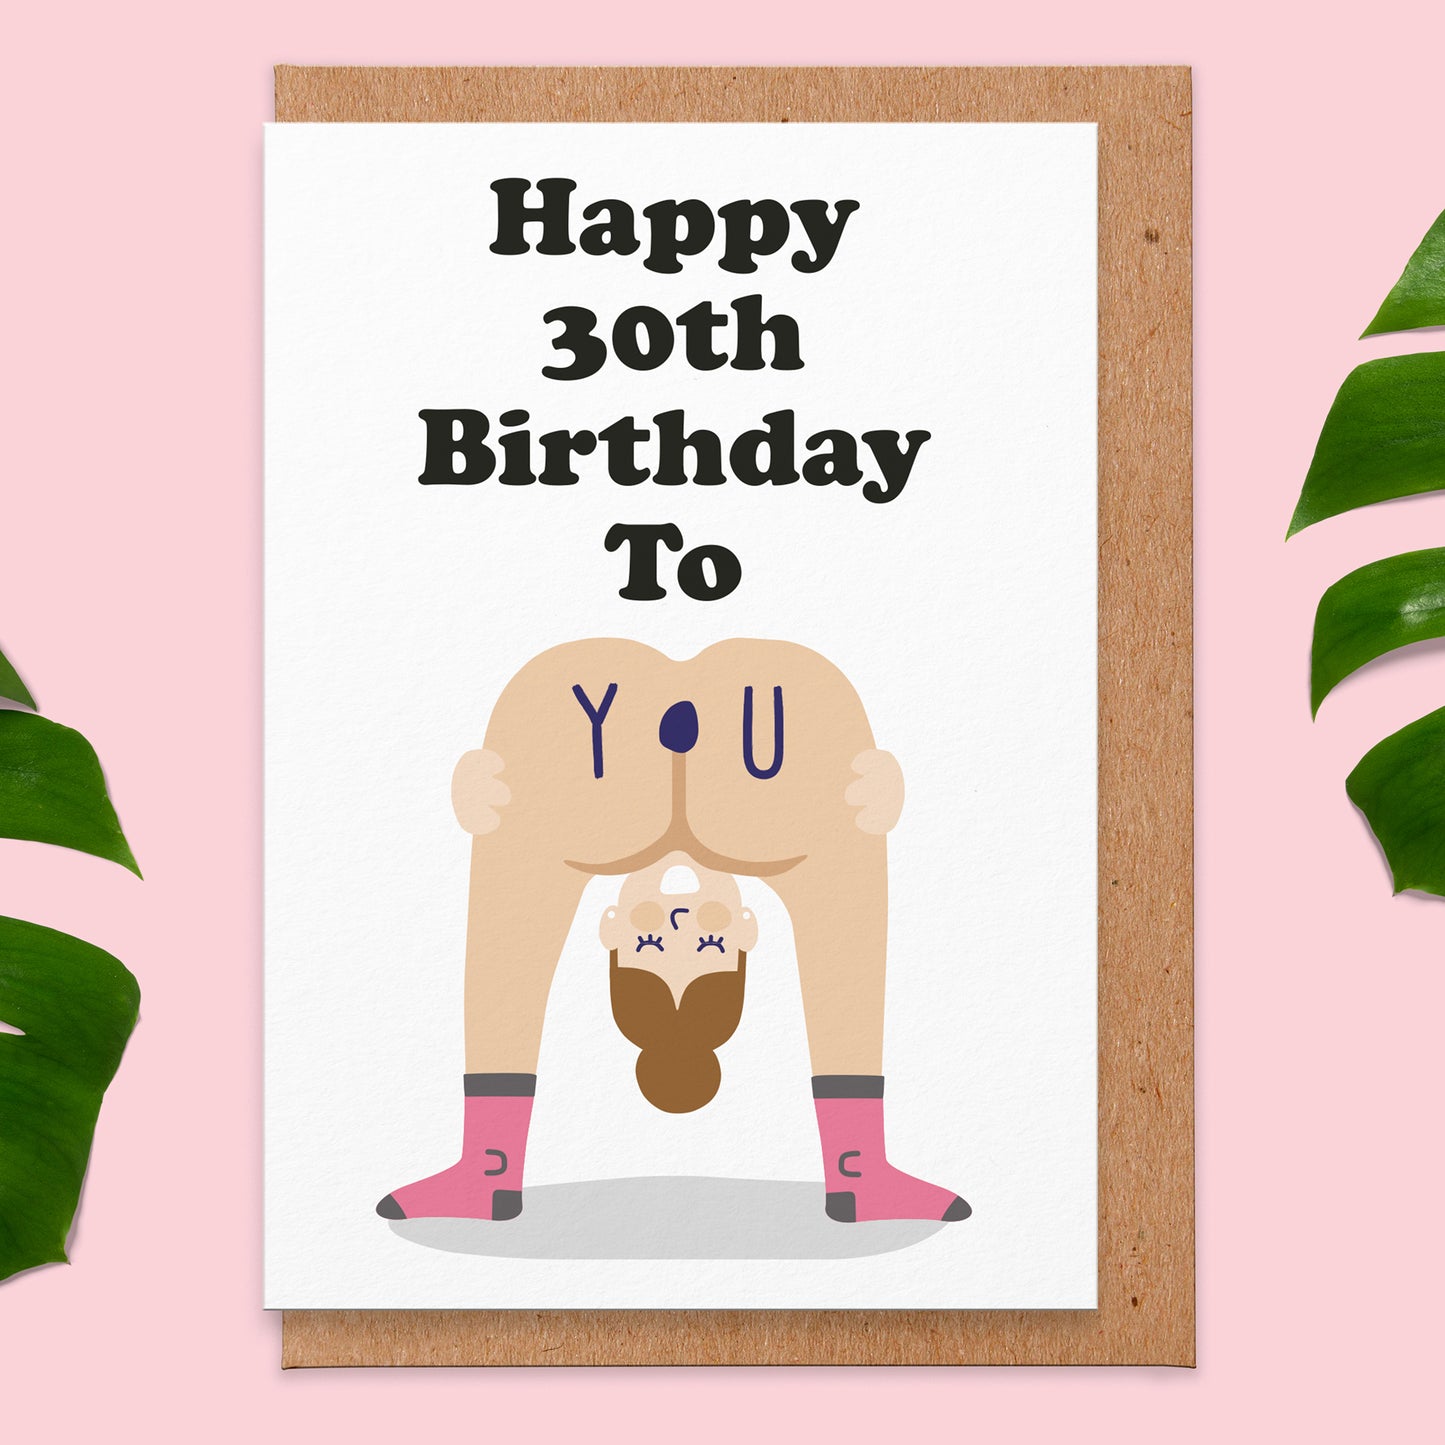 Birthday card that reads happy 30th birthday to you with a woman bending over.